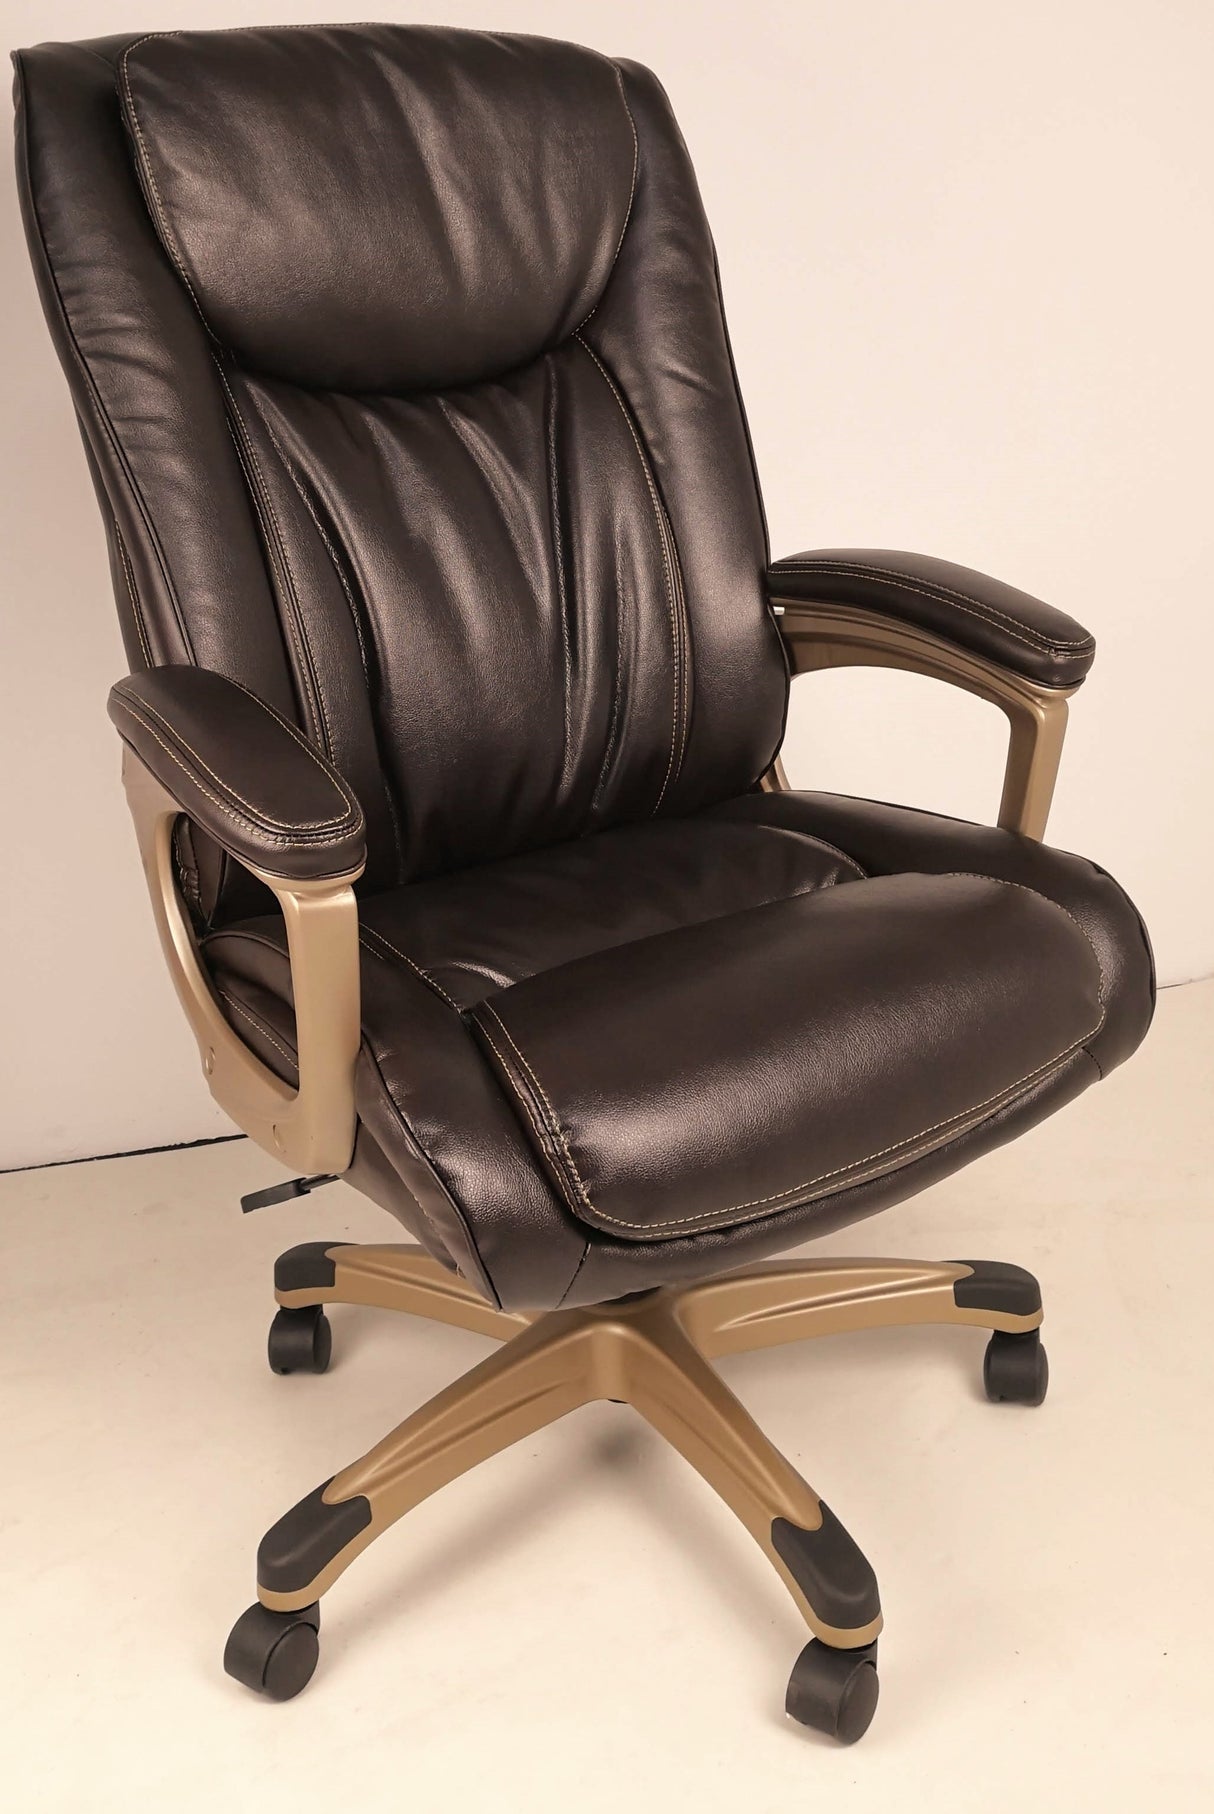 Soft Padded Executive Office Chair in Brown Leather - 2029